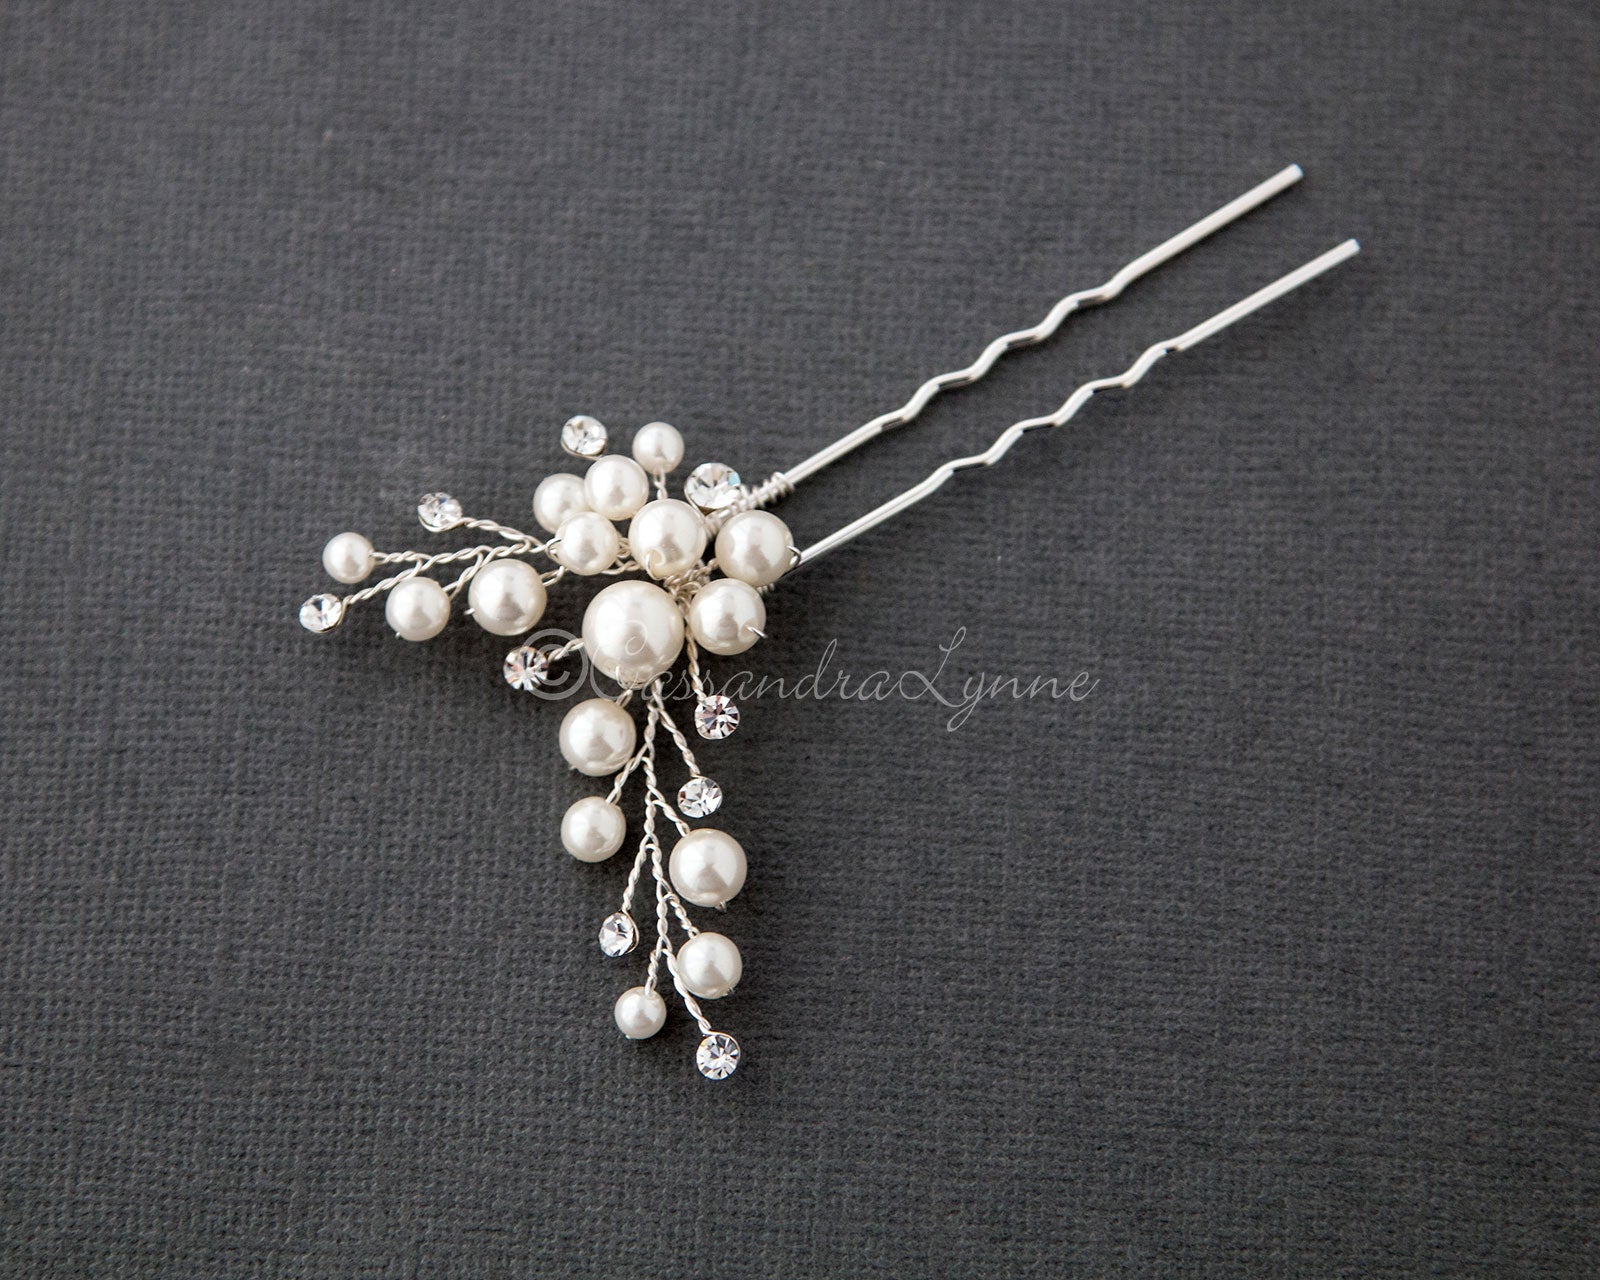 Wedding Hair Pin of Ivory Pearl Cluster and Rhinestones - Cassandra Lynne